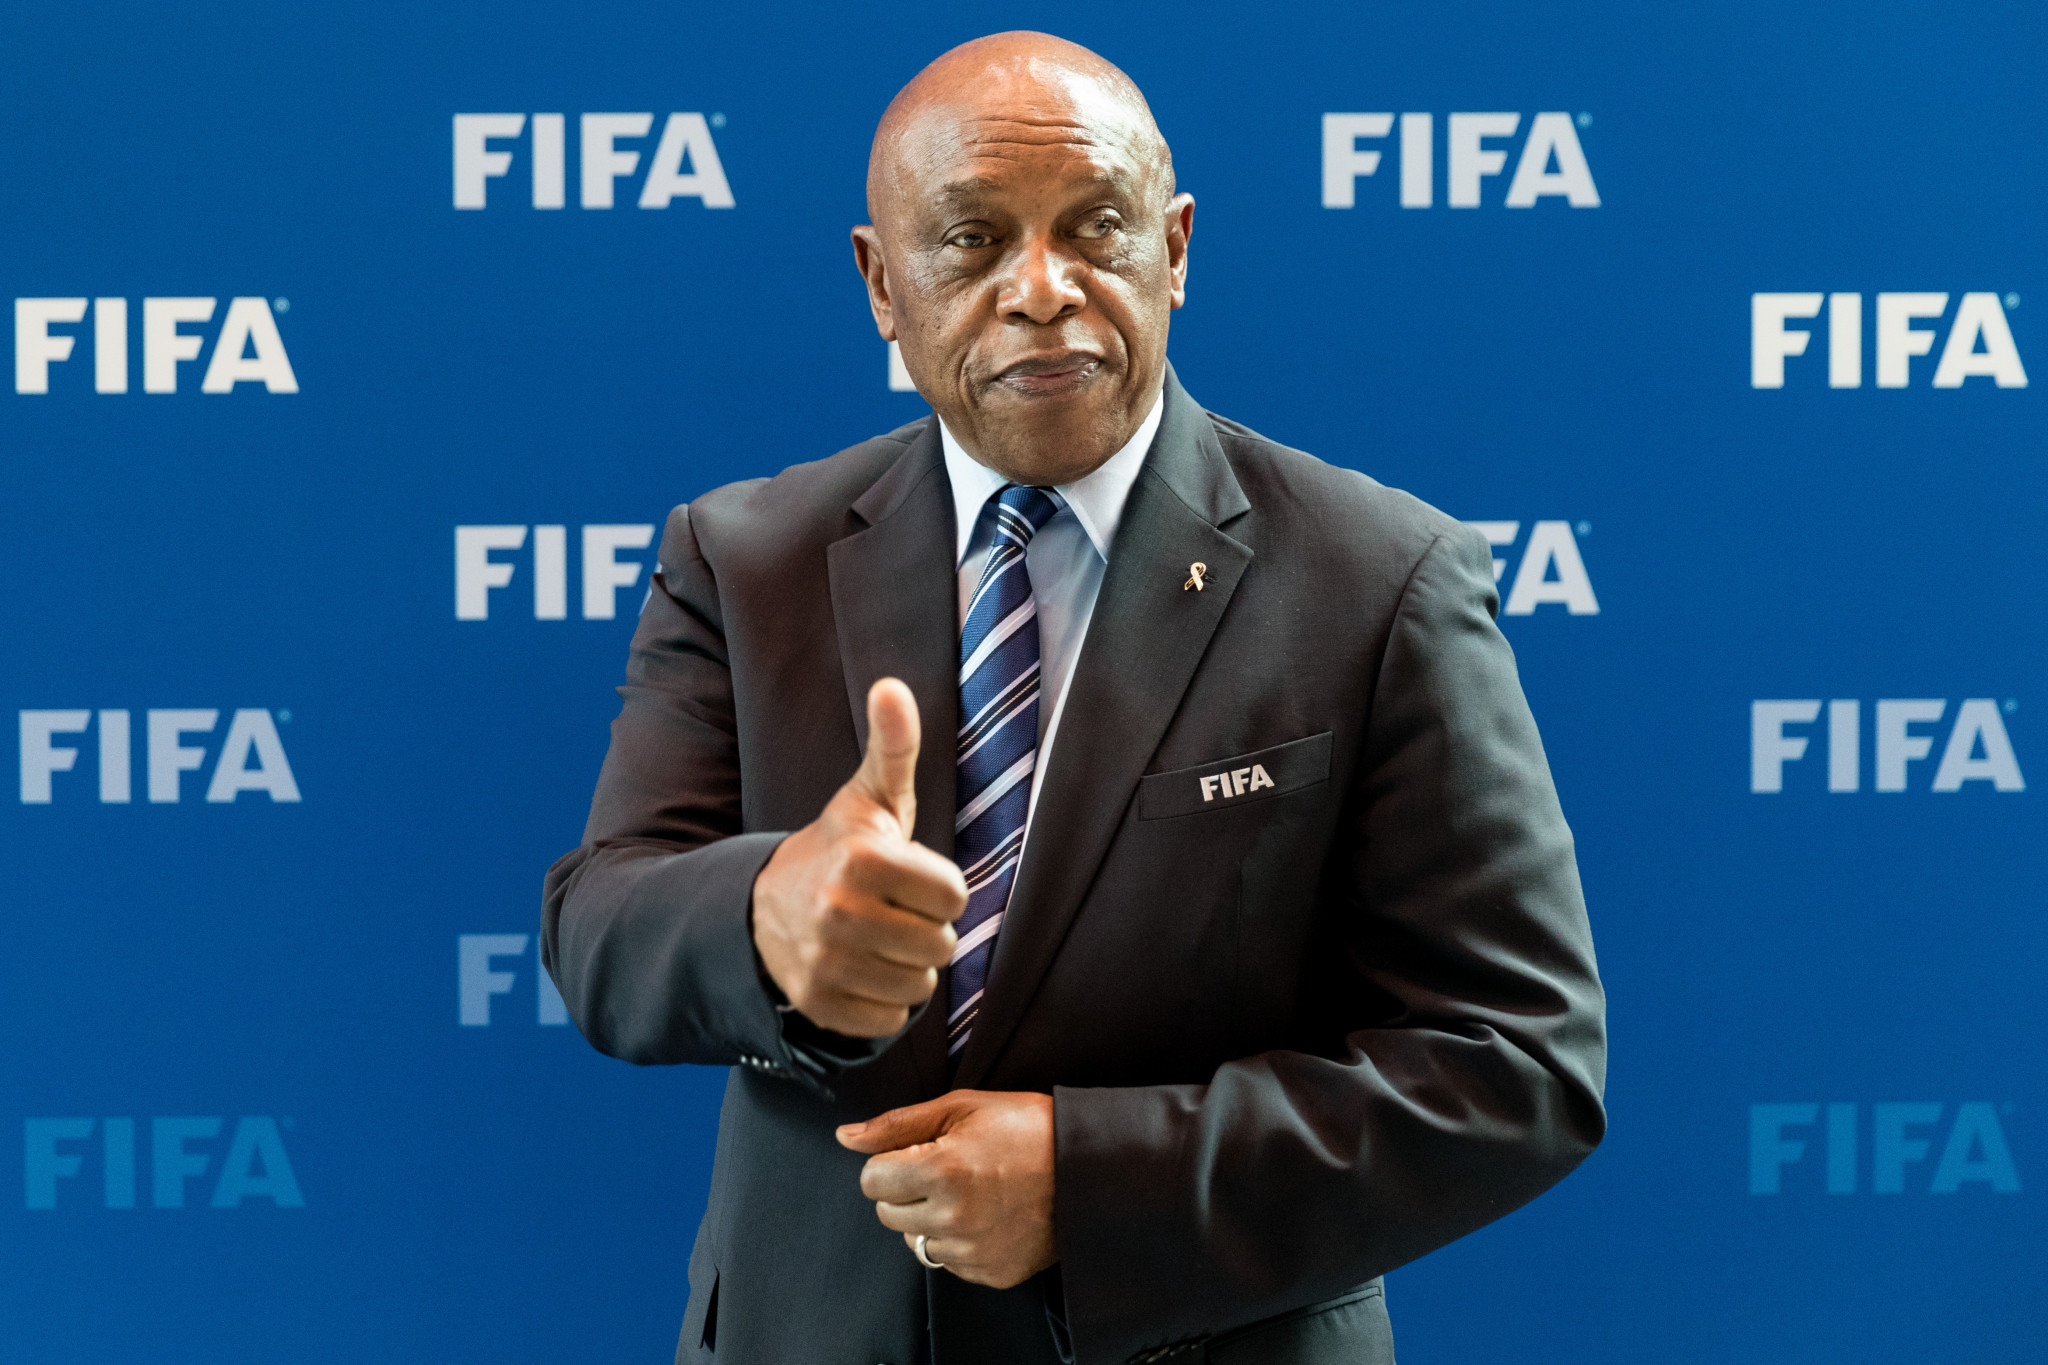 Tokyo Sexwale chaired the panel mandated with solving the issue ©Getty Images